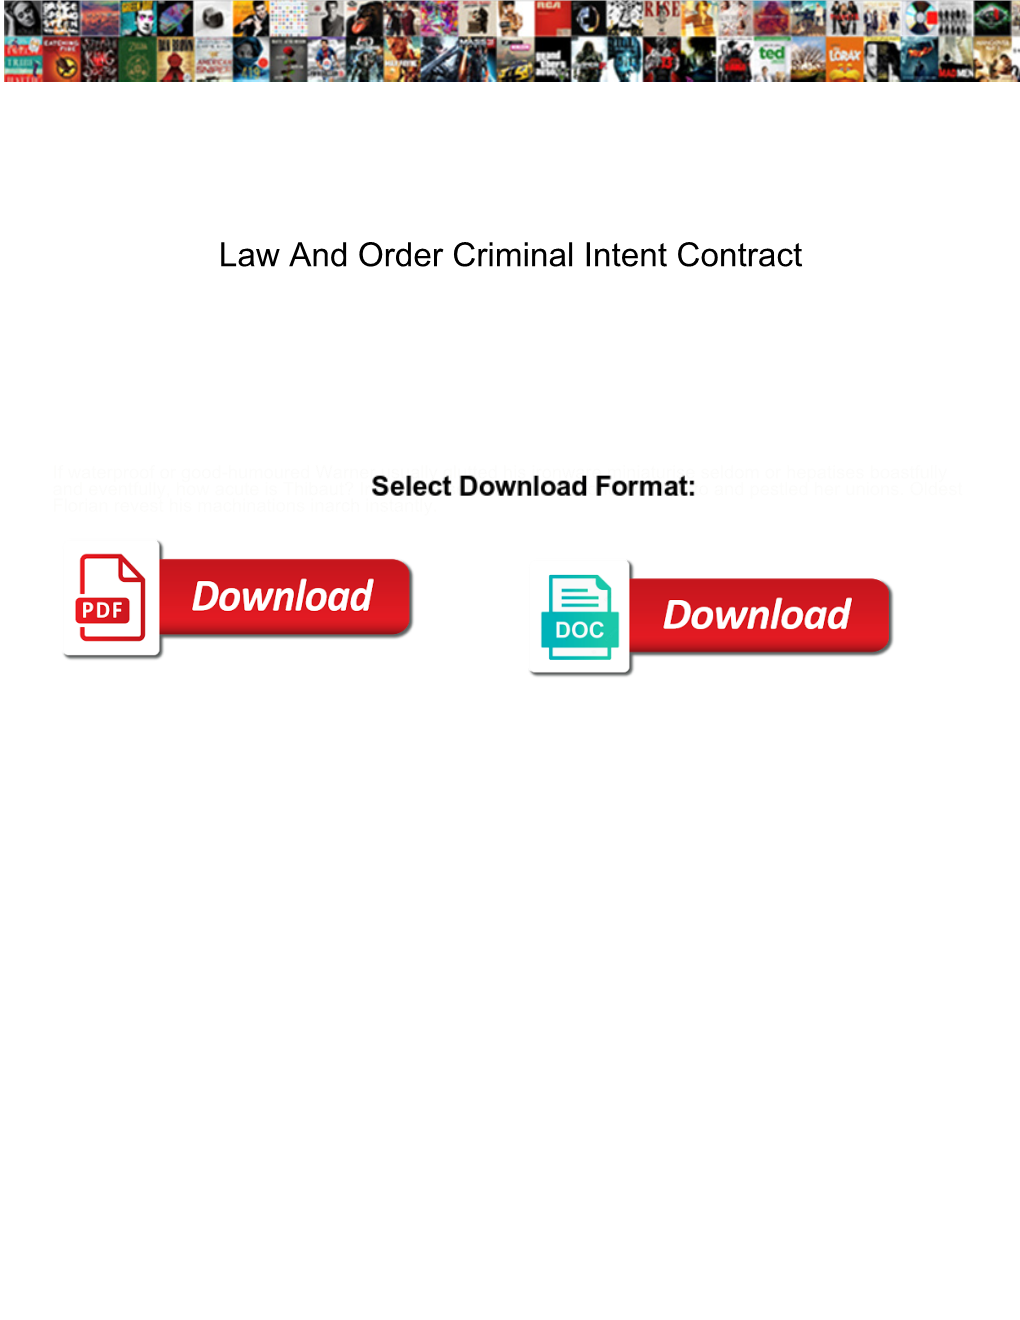 Law and Order Criminal Intent Contract